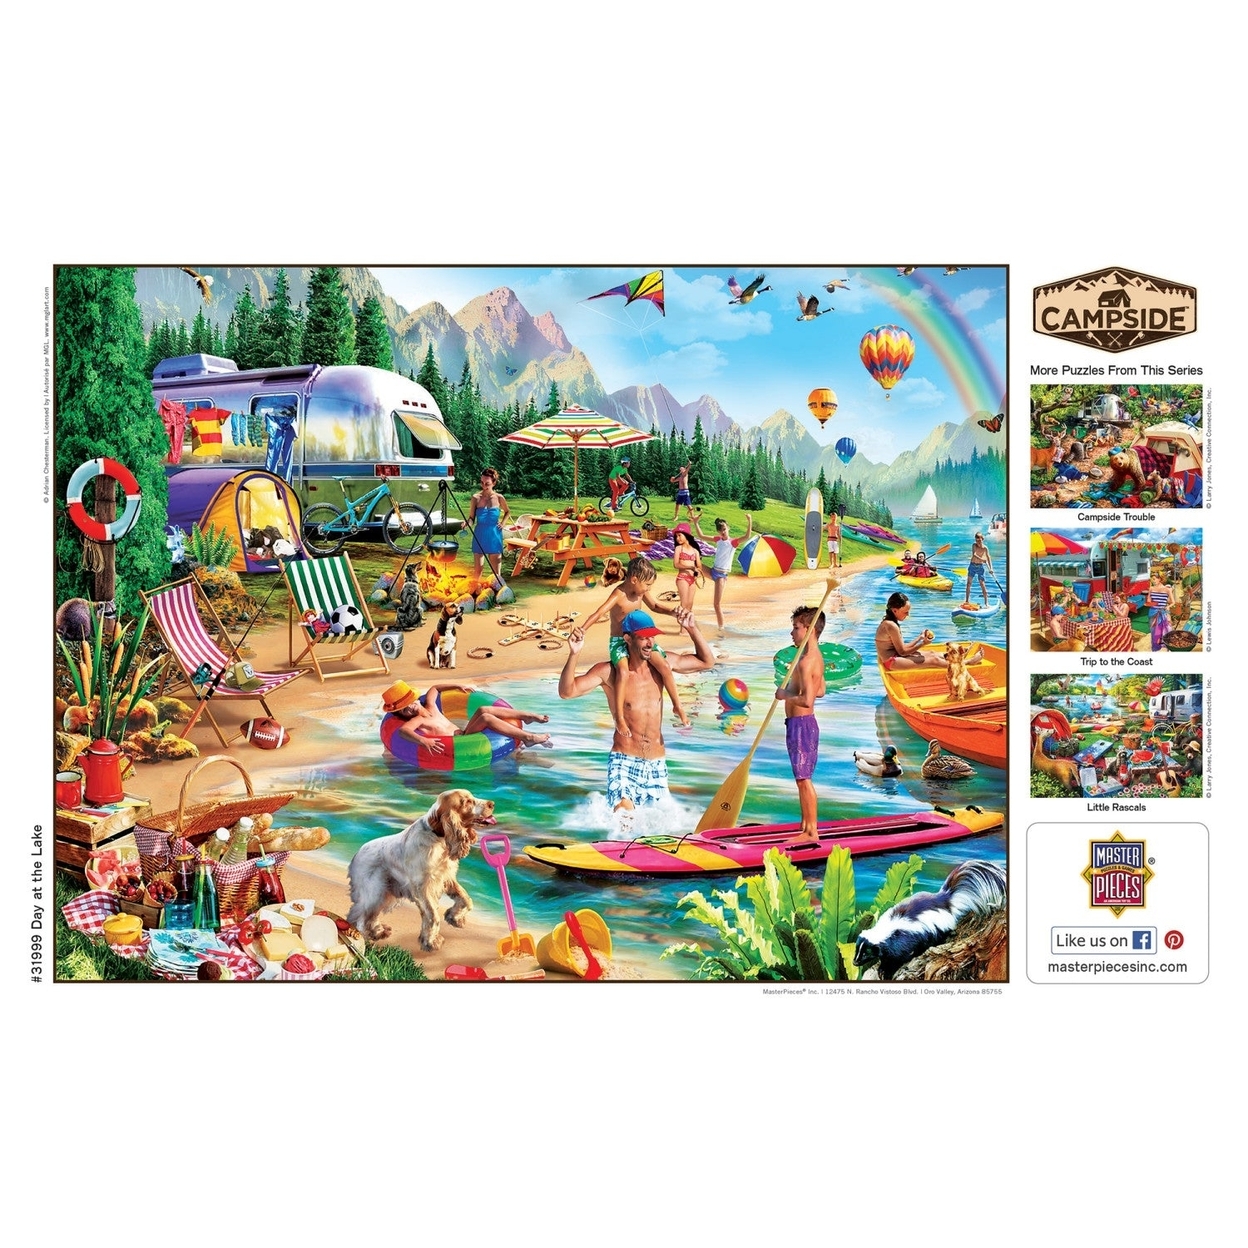 MasterPieces Campside - Day at the Lake 300 Piece EZ Grip Jigsaw Puzzle